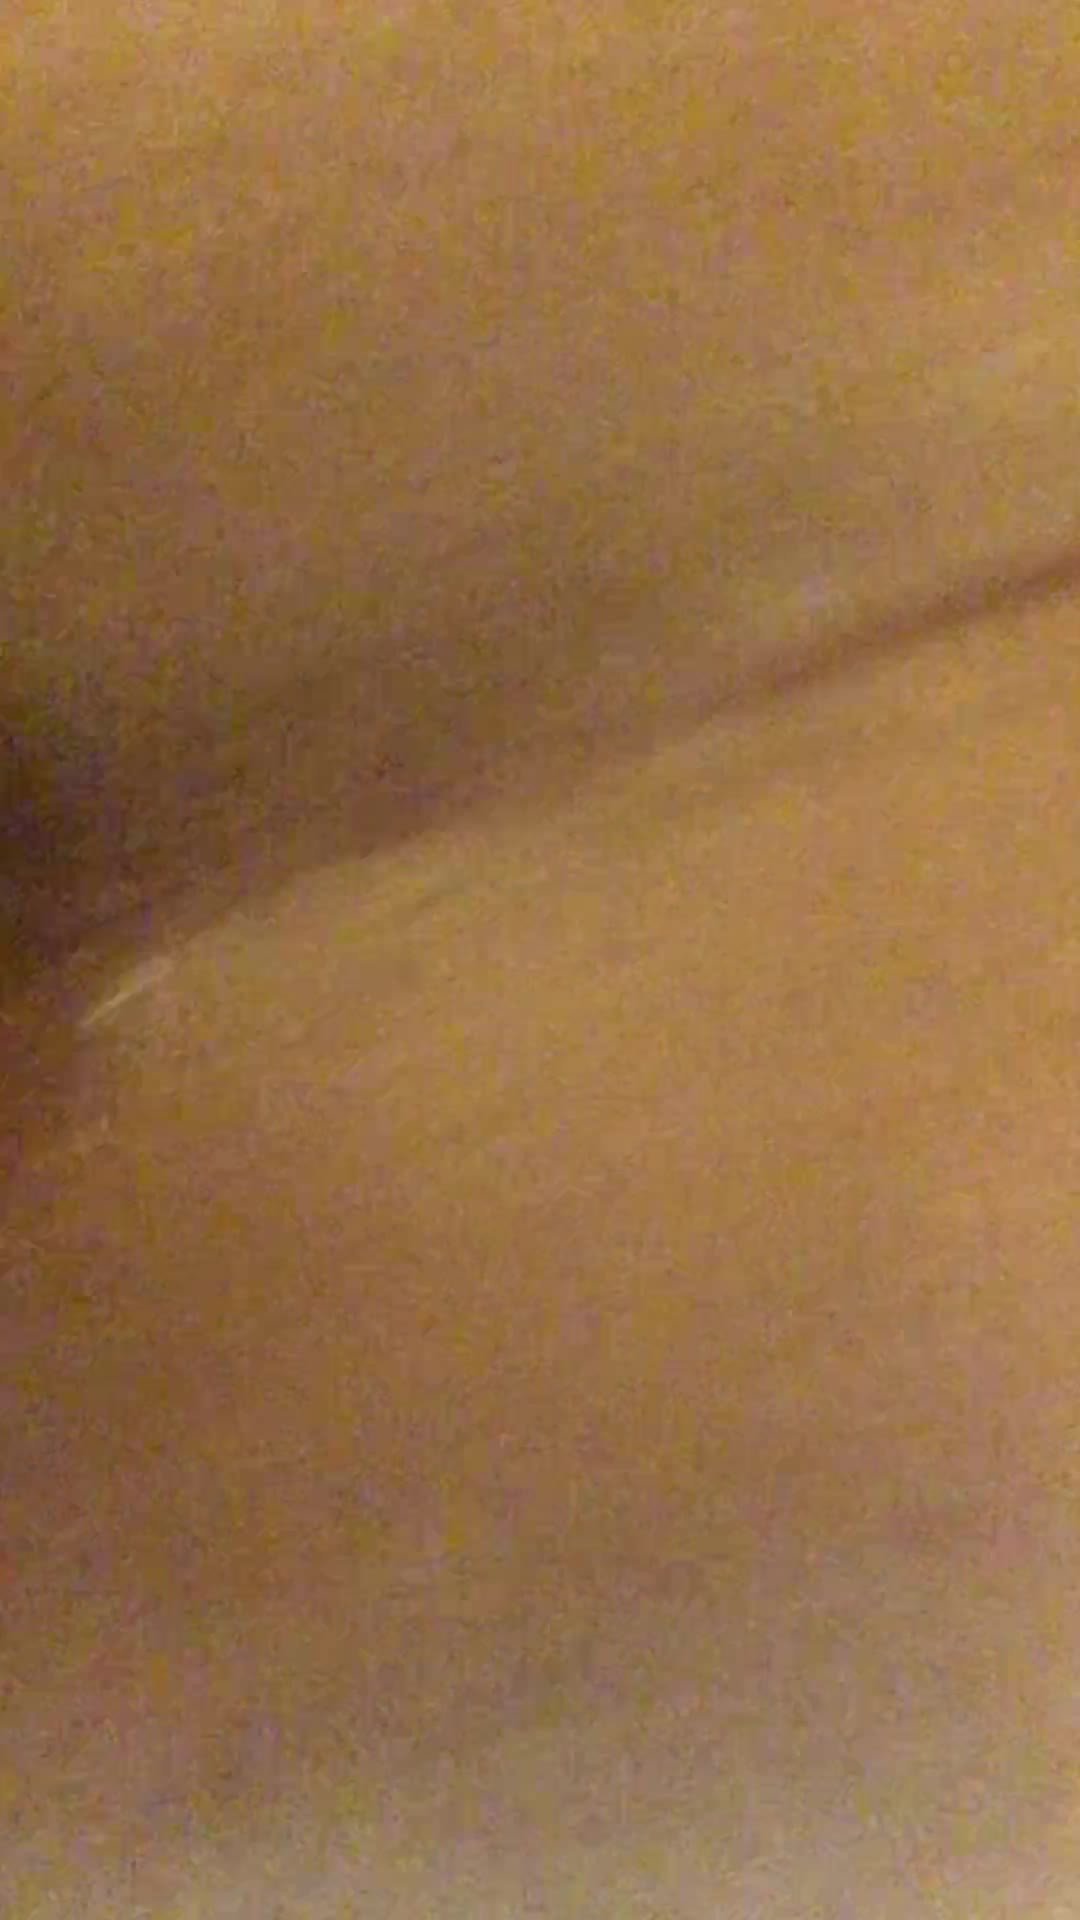 Video post by Queenslayer